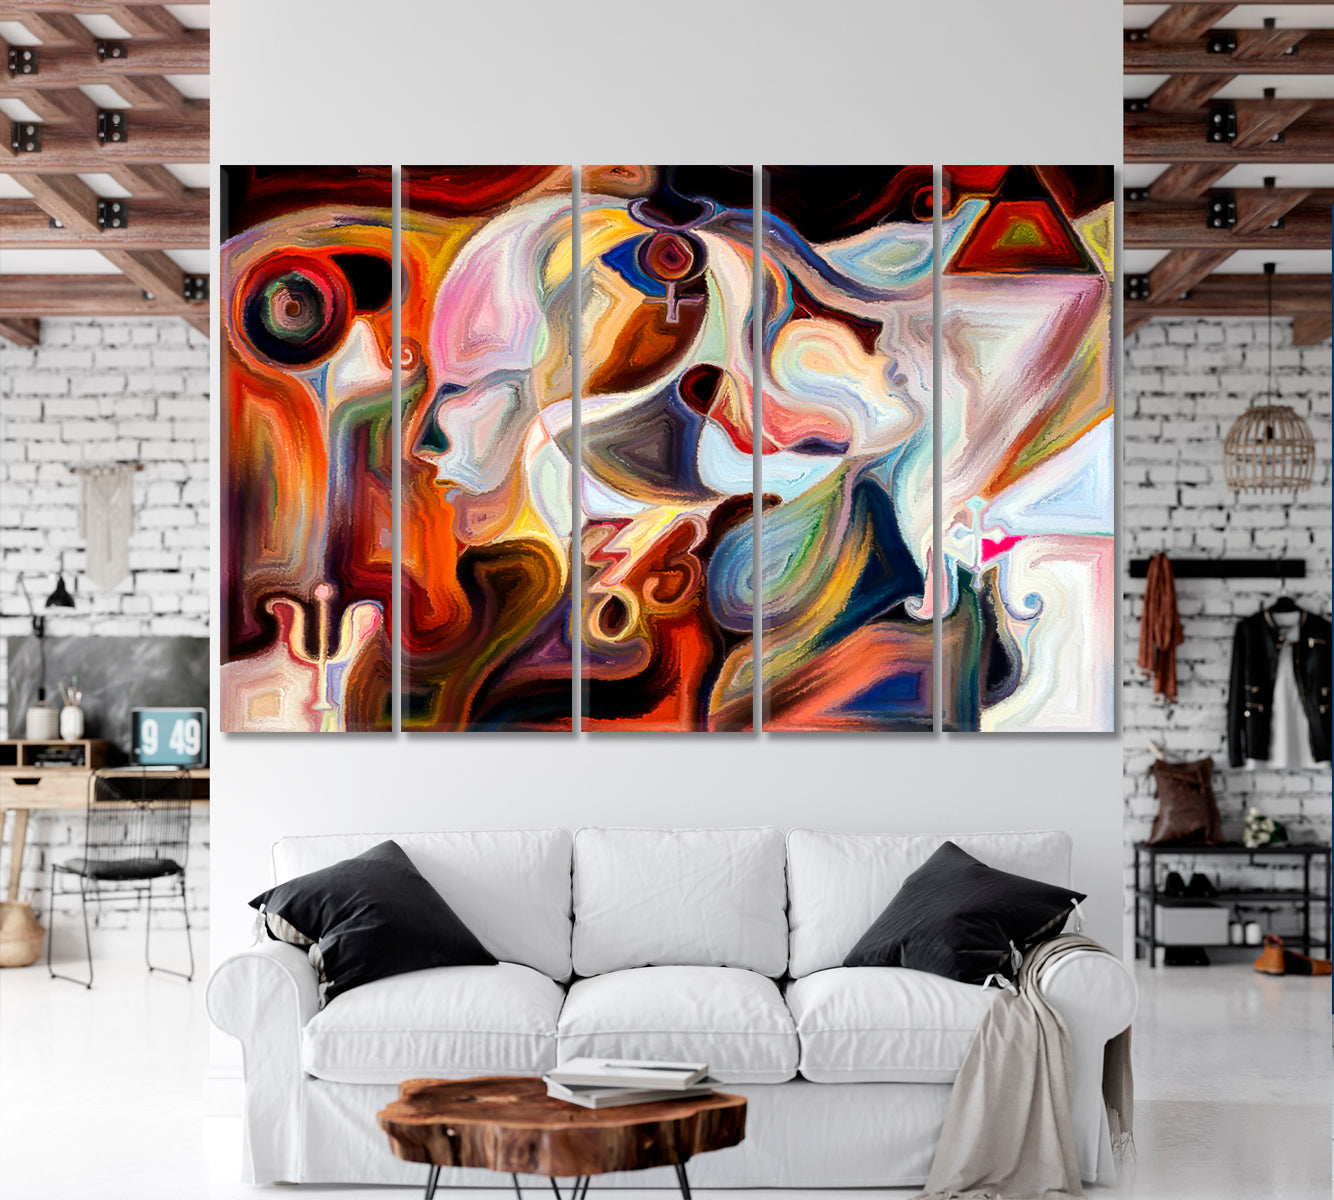 Inner Colors. Human Profile And Colorful Vivid Paint Shapes Abstract Design Contemporary Art Artesty 5 panels 36" x 24" 